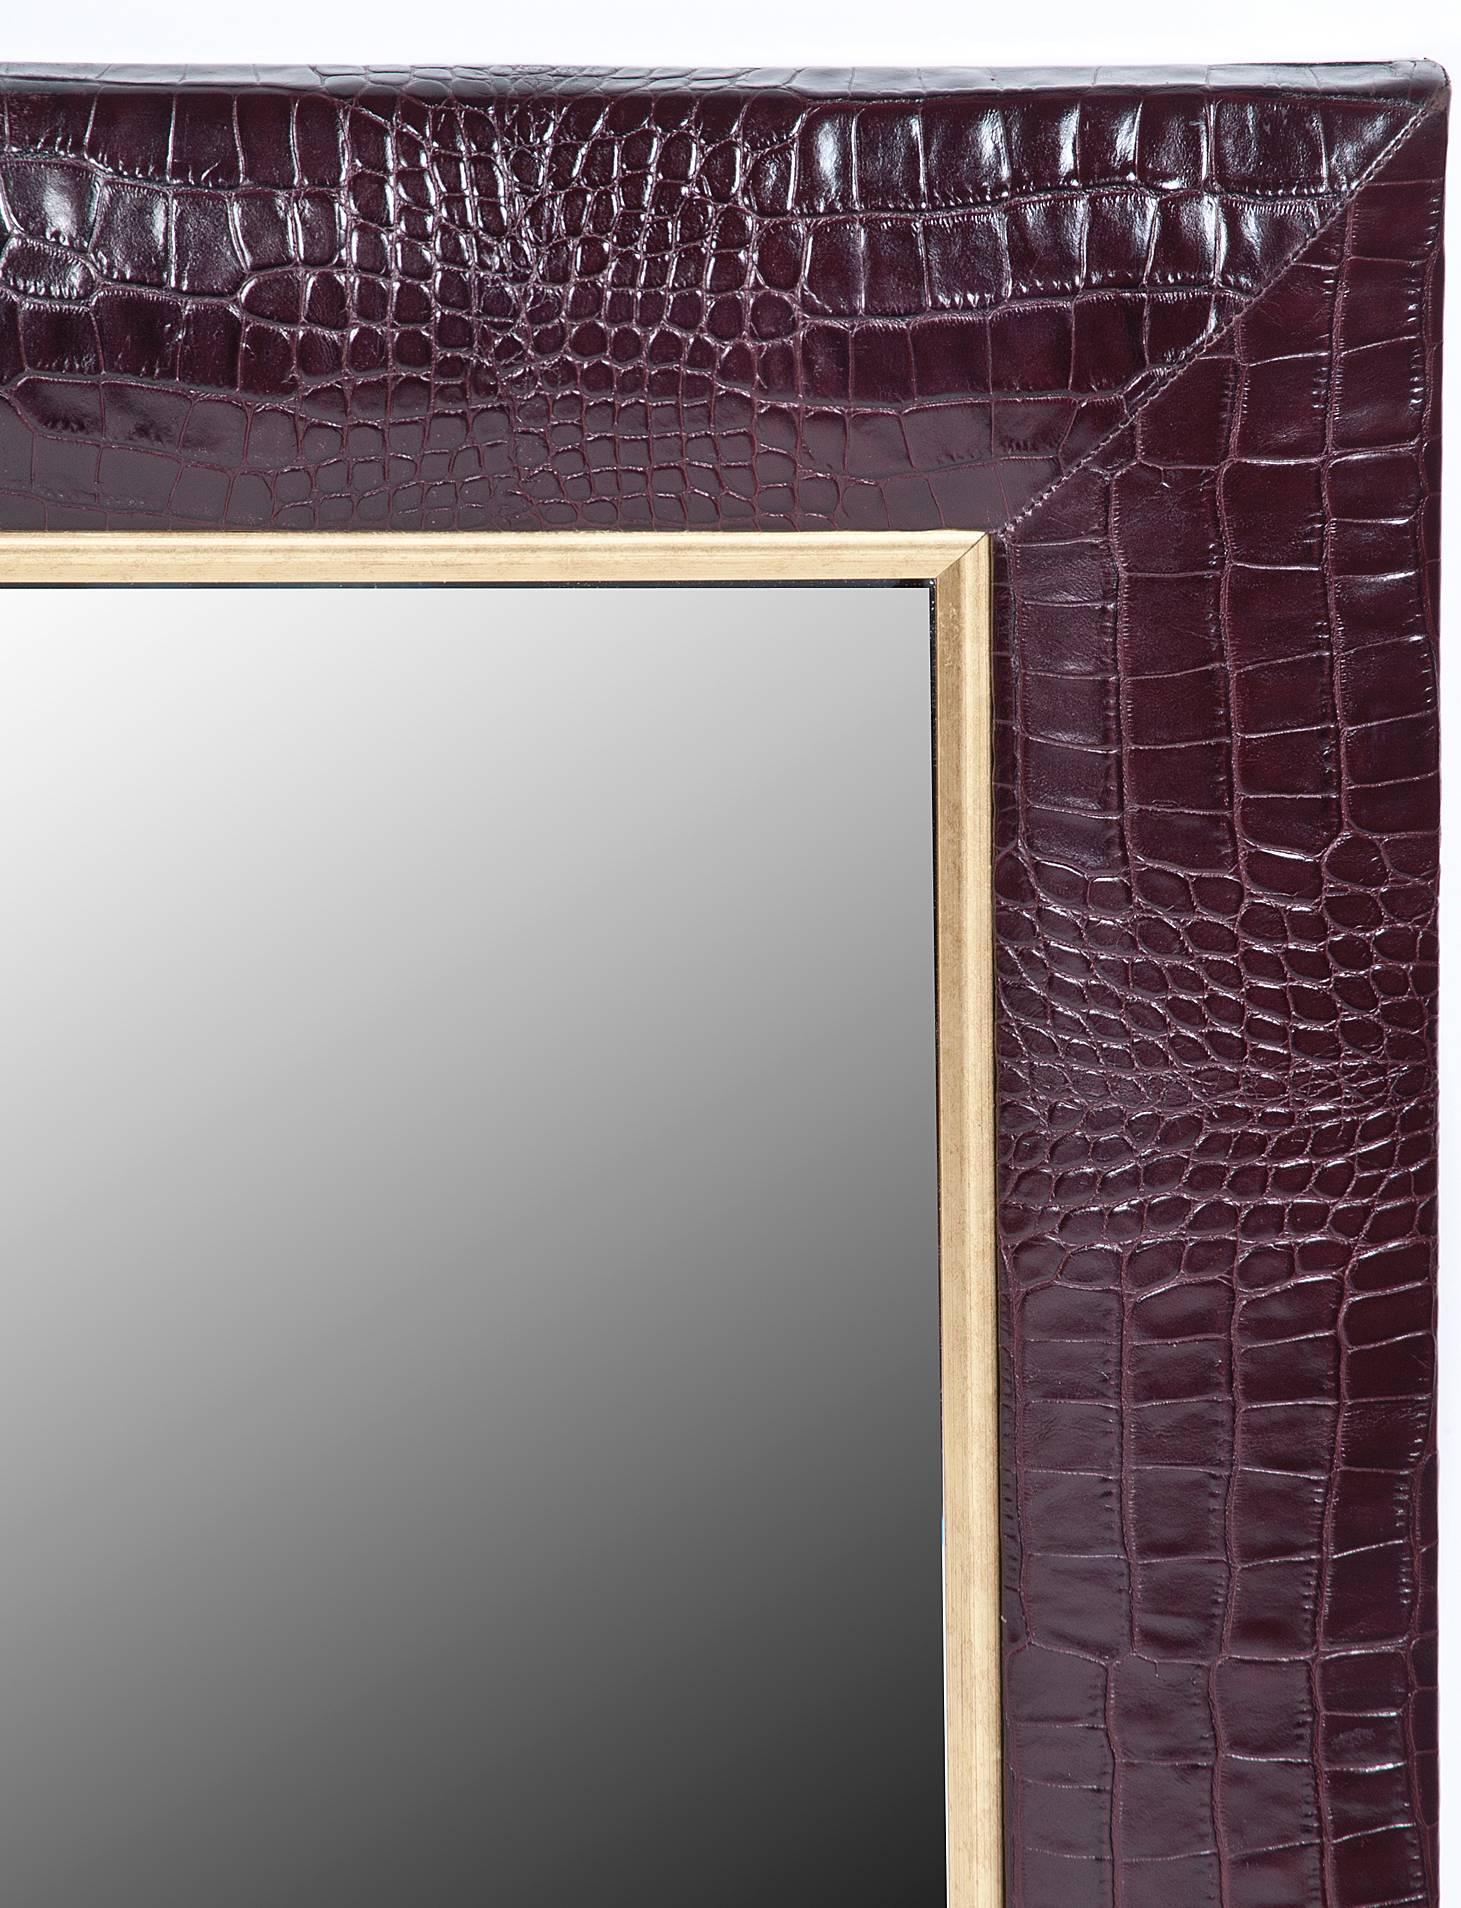 • Crocodile Embossed Bordeaux Italian Leather with champagne gold detailing
• 1 ¼” Beveled Mirror
• 4” wide leather frame
• Hand-stitched corners
• Measurements including frame – 28”W x 32”H x 1”D

Additional quantity made to order upon